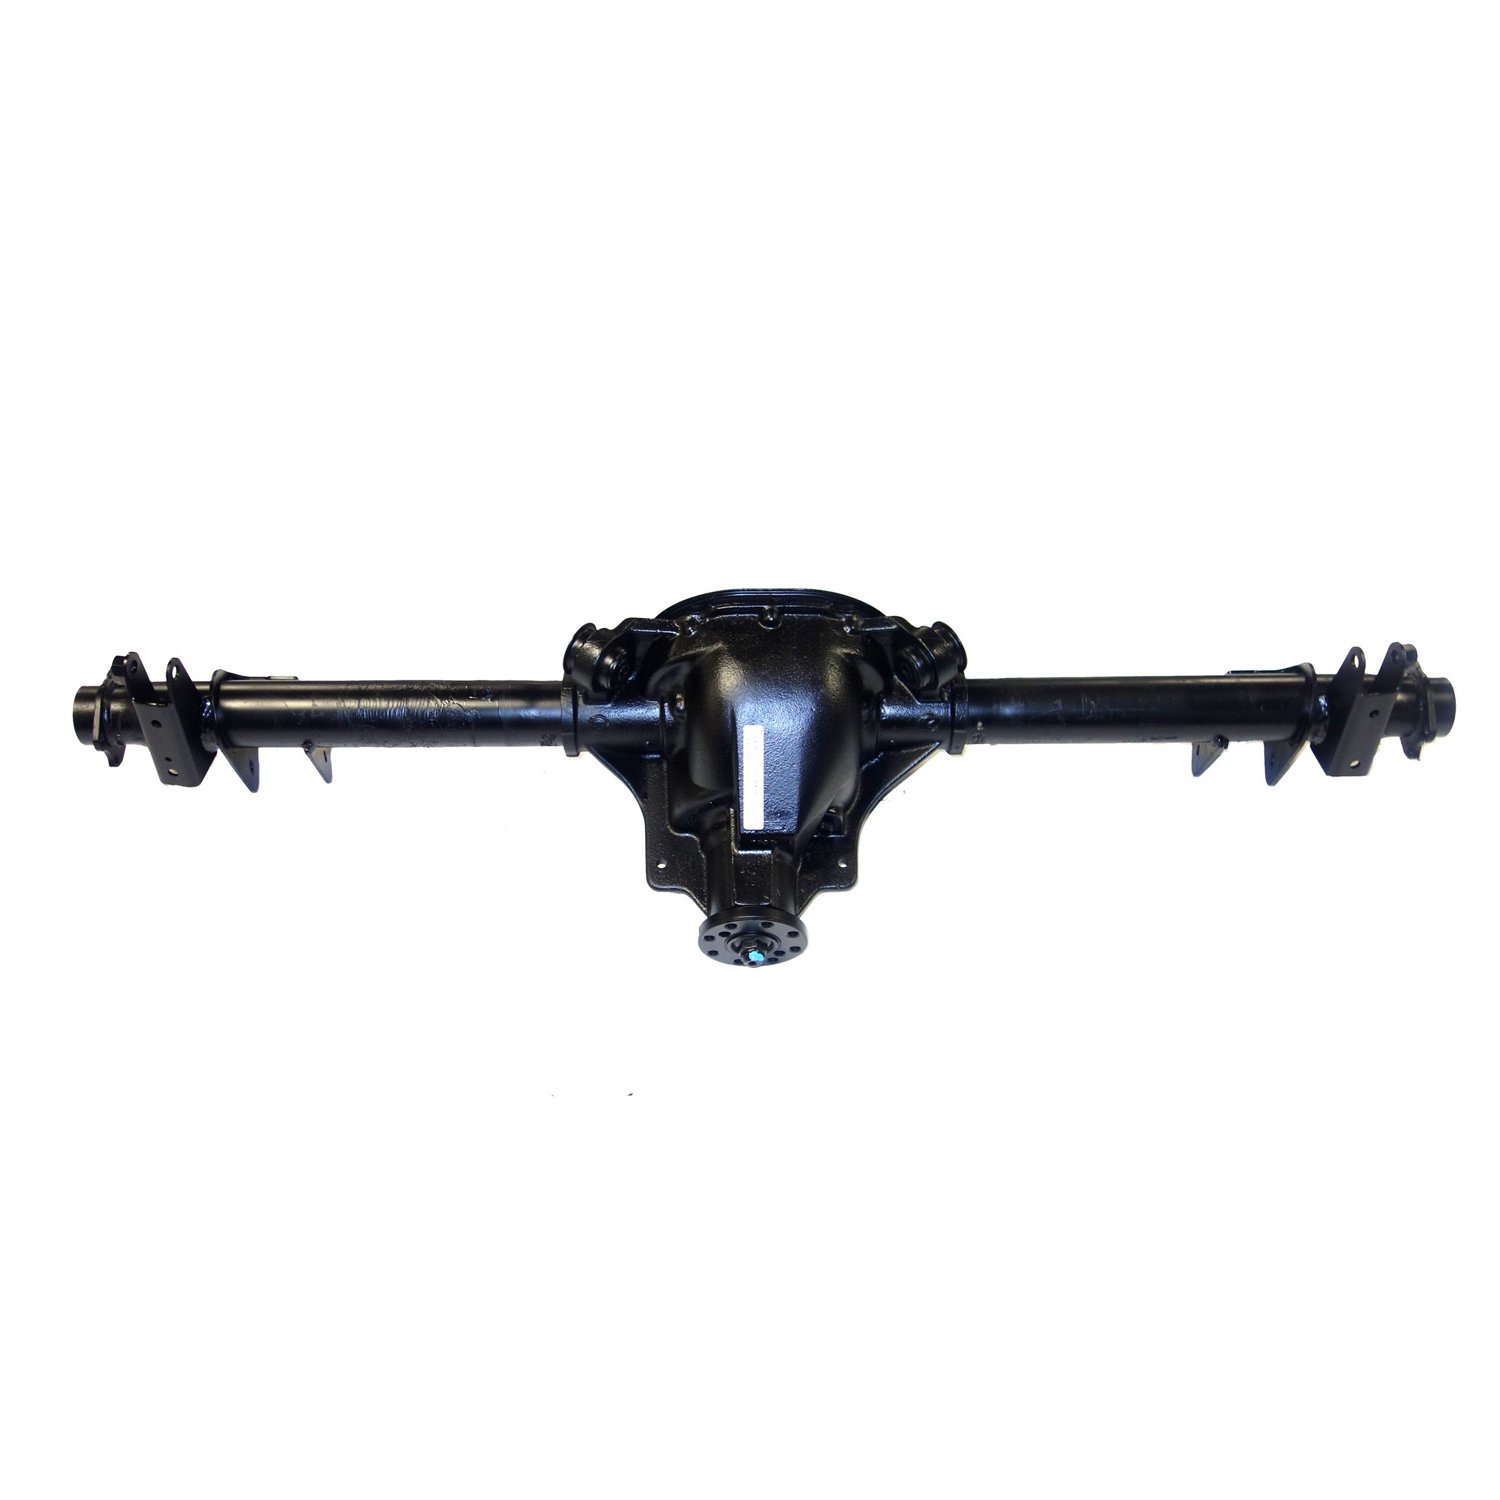 Remanufactured Complete Axle Assembly for 8.8" 86-93 Mustang 3.27, Drum Brakes, Posi LSD